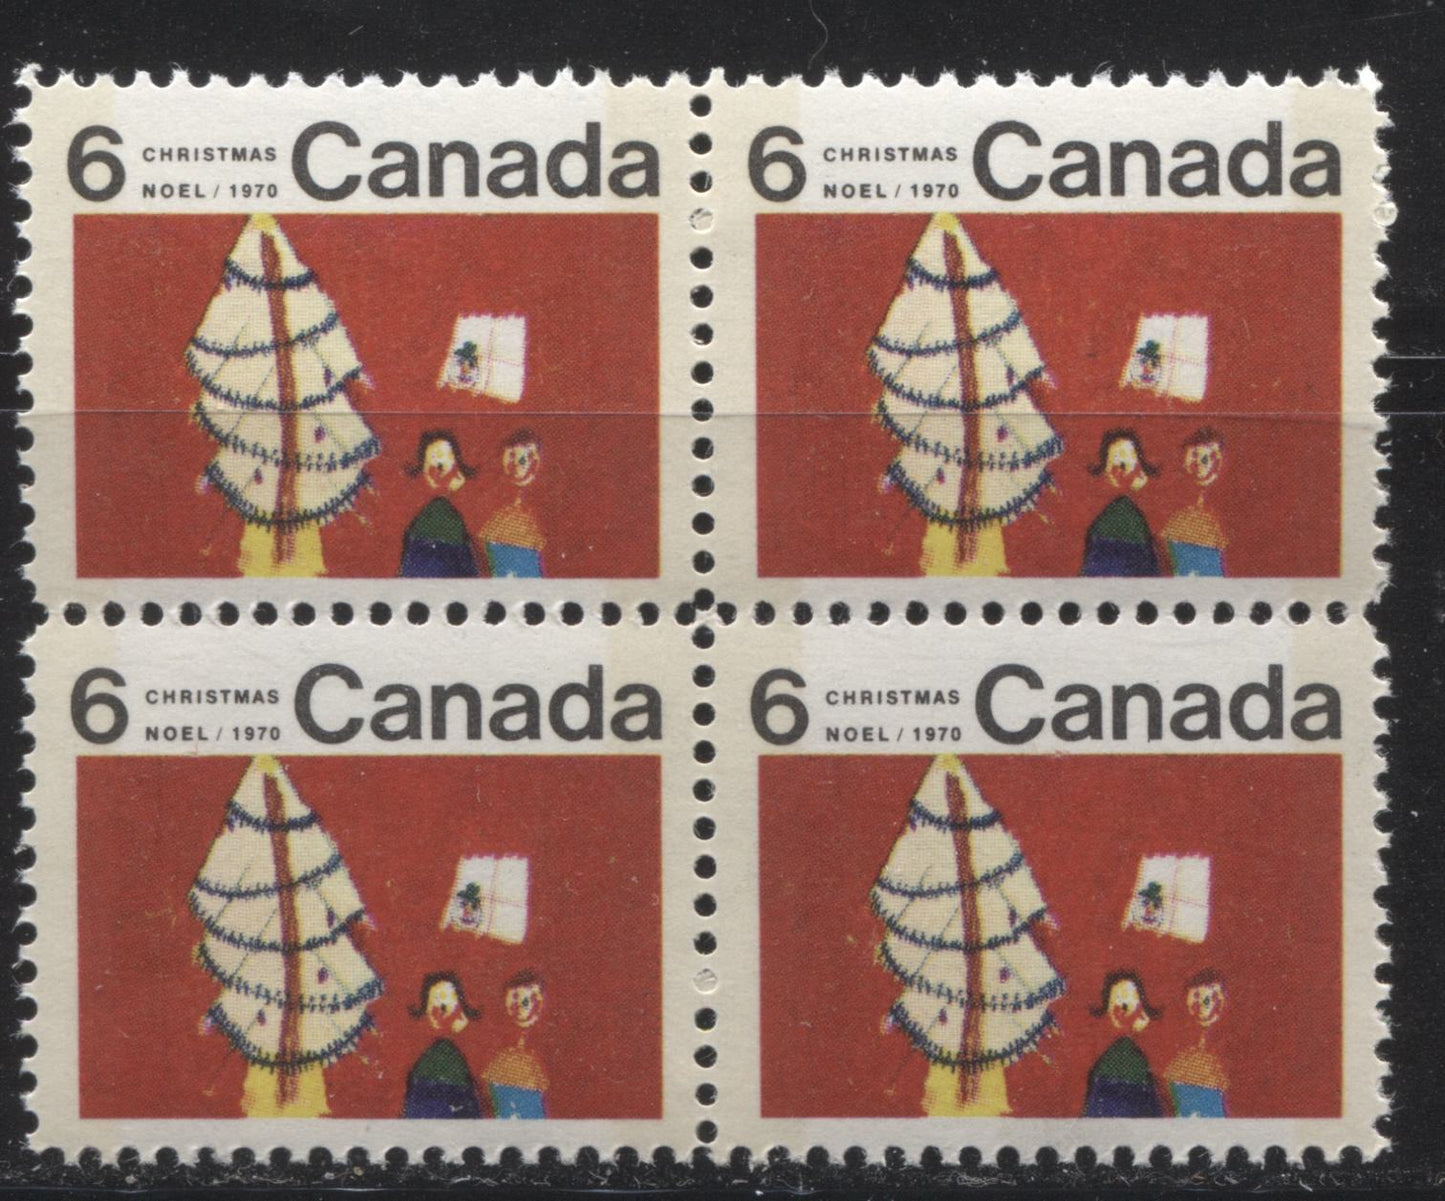 Lot 158 Canada #525i 6c Multicoloured Family & Christmas Tree, 1970 Christmas Issue, a VFNH Winnipeg Tagged Centre Block of 4 on HB11 Ribbed Paper, With Scratch on Window on UL Stamp, and Black Dash Beside Window on UR Stamp, Perf. 11.95 x 11.9